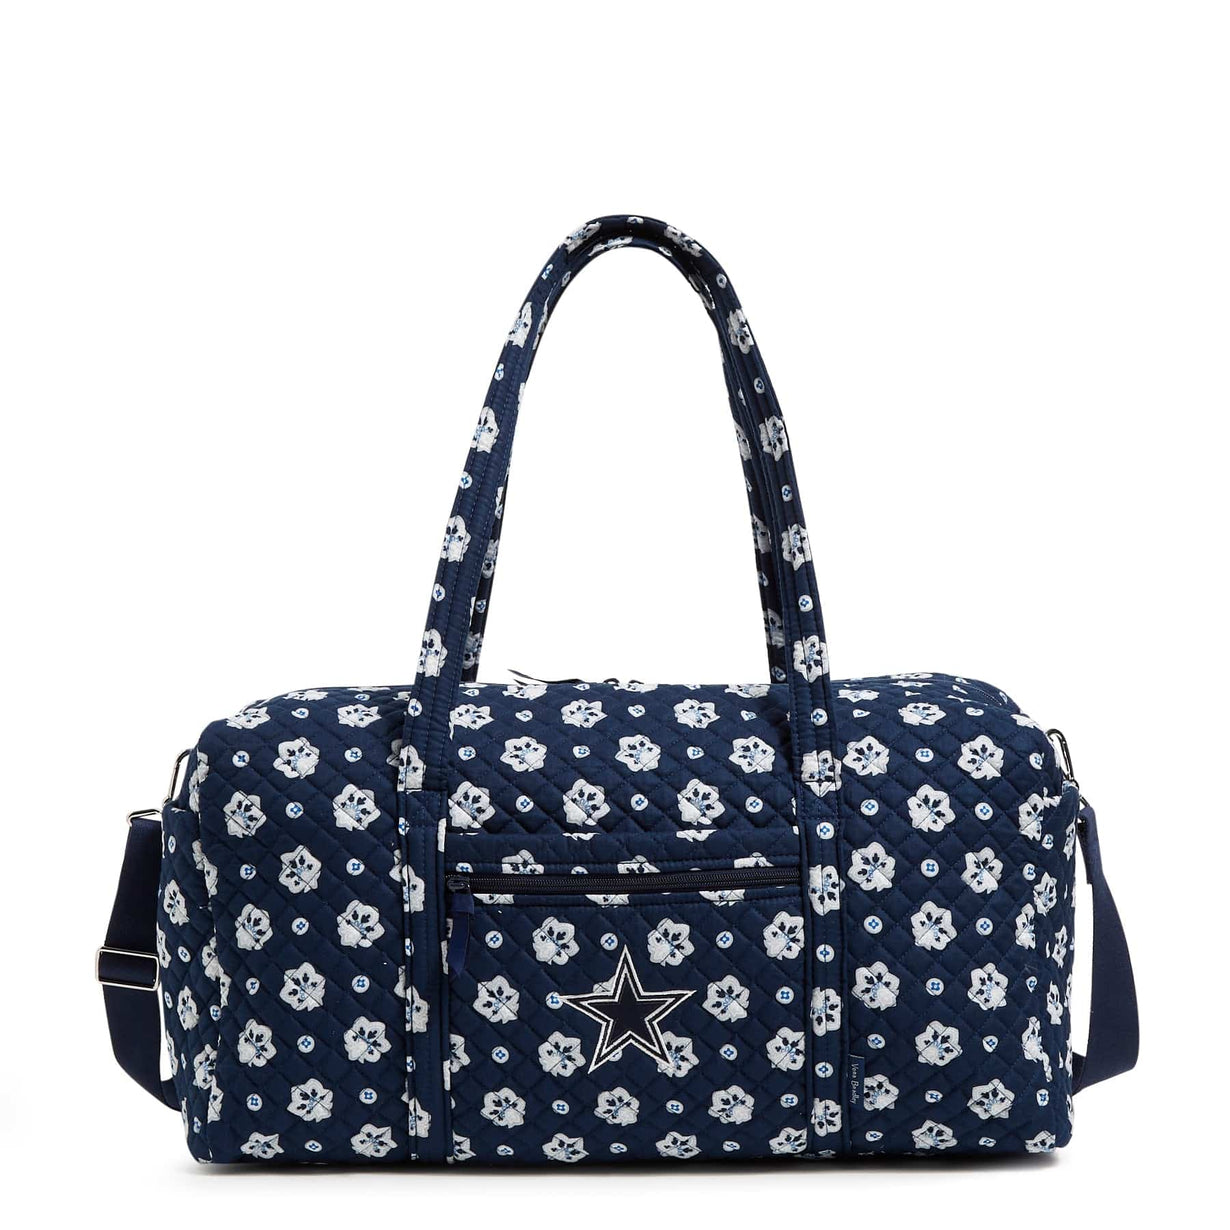 Large patterned duffel bag with Dallas Cowboys logo